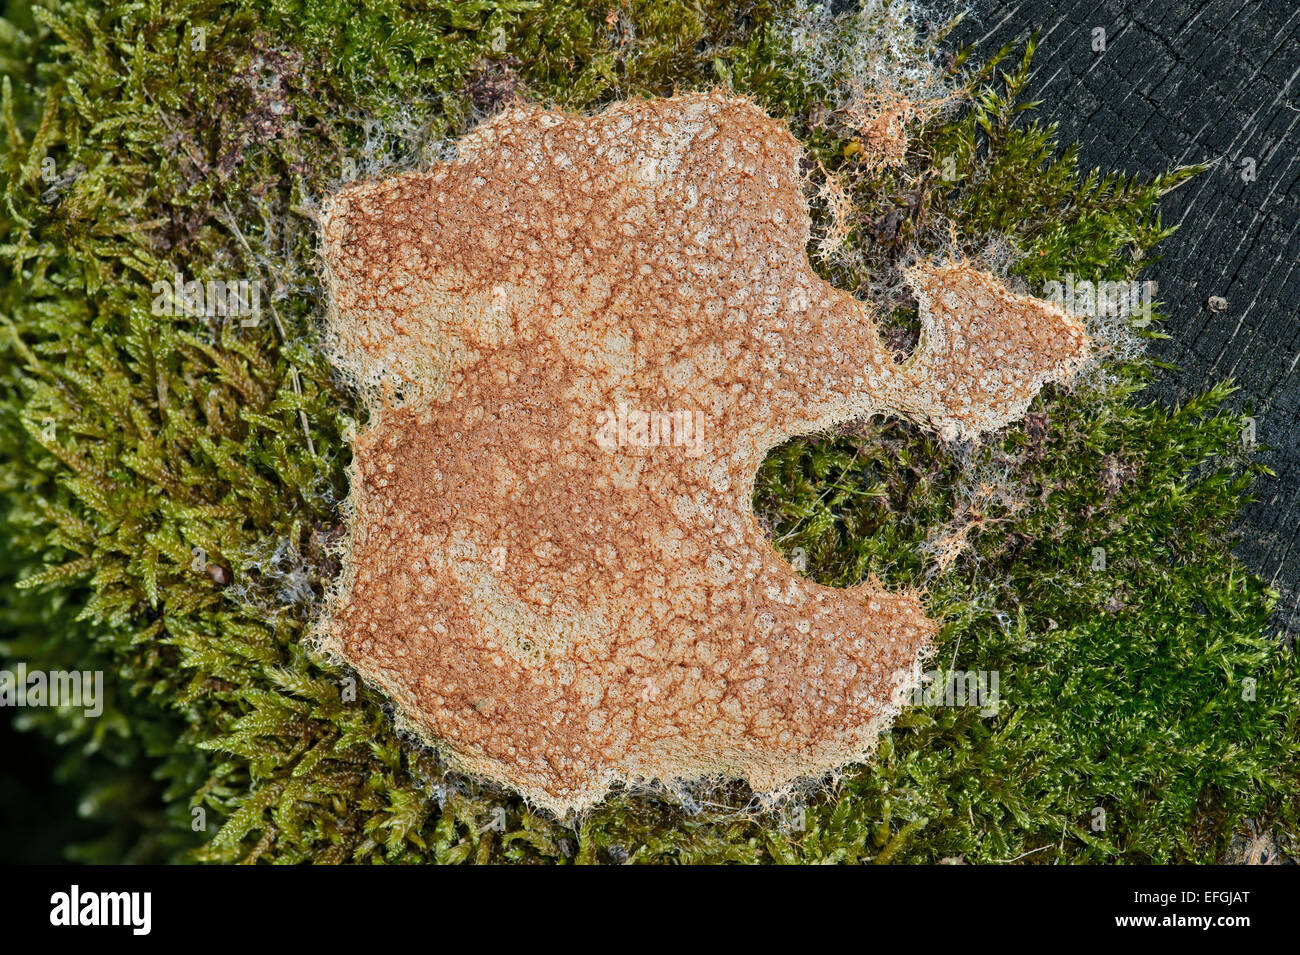 Dog Vomit Slime Mold or Scrambled Egg Slime Mold (Fuligo septica), with whitish shiny trail of slime from indigestible waste Stock Photo